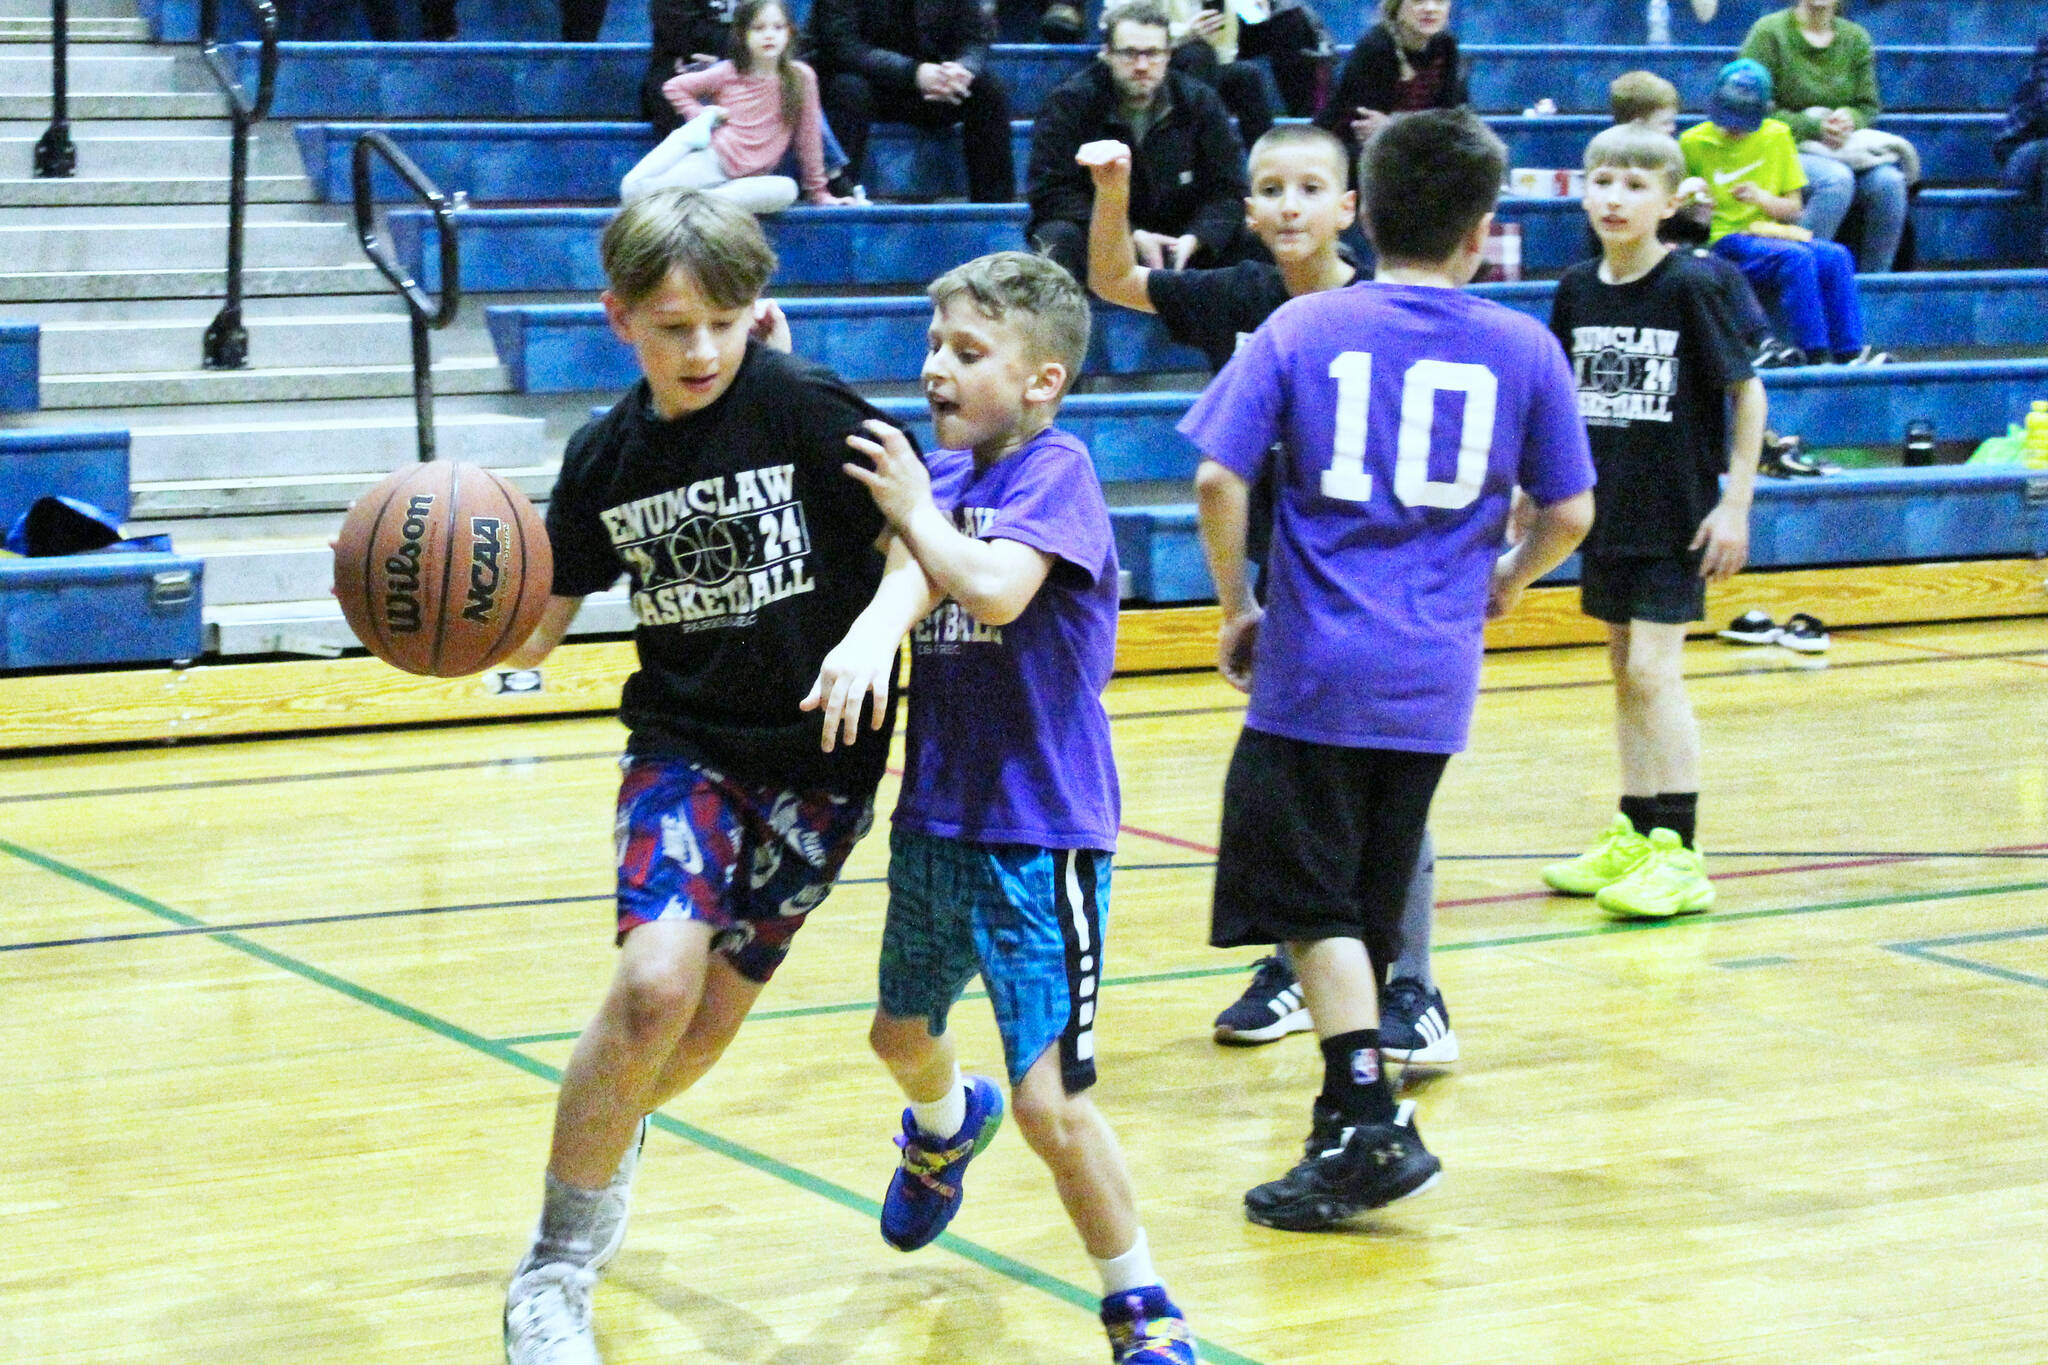 Enumclaw Parks and Rec youth basketball program uses Enumclaw School District elementary and middle schools, but gym space is limited; building a full gym would allow the programs to expand, Parks and Rec Director Alina Hibbs has said. Photo by Ray Miller-Still